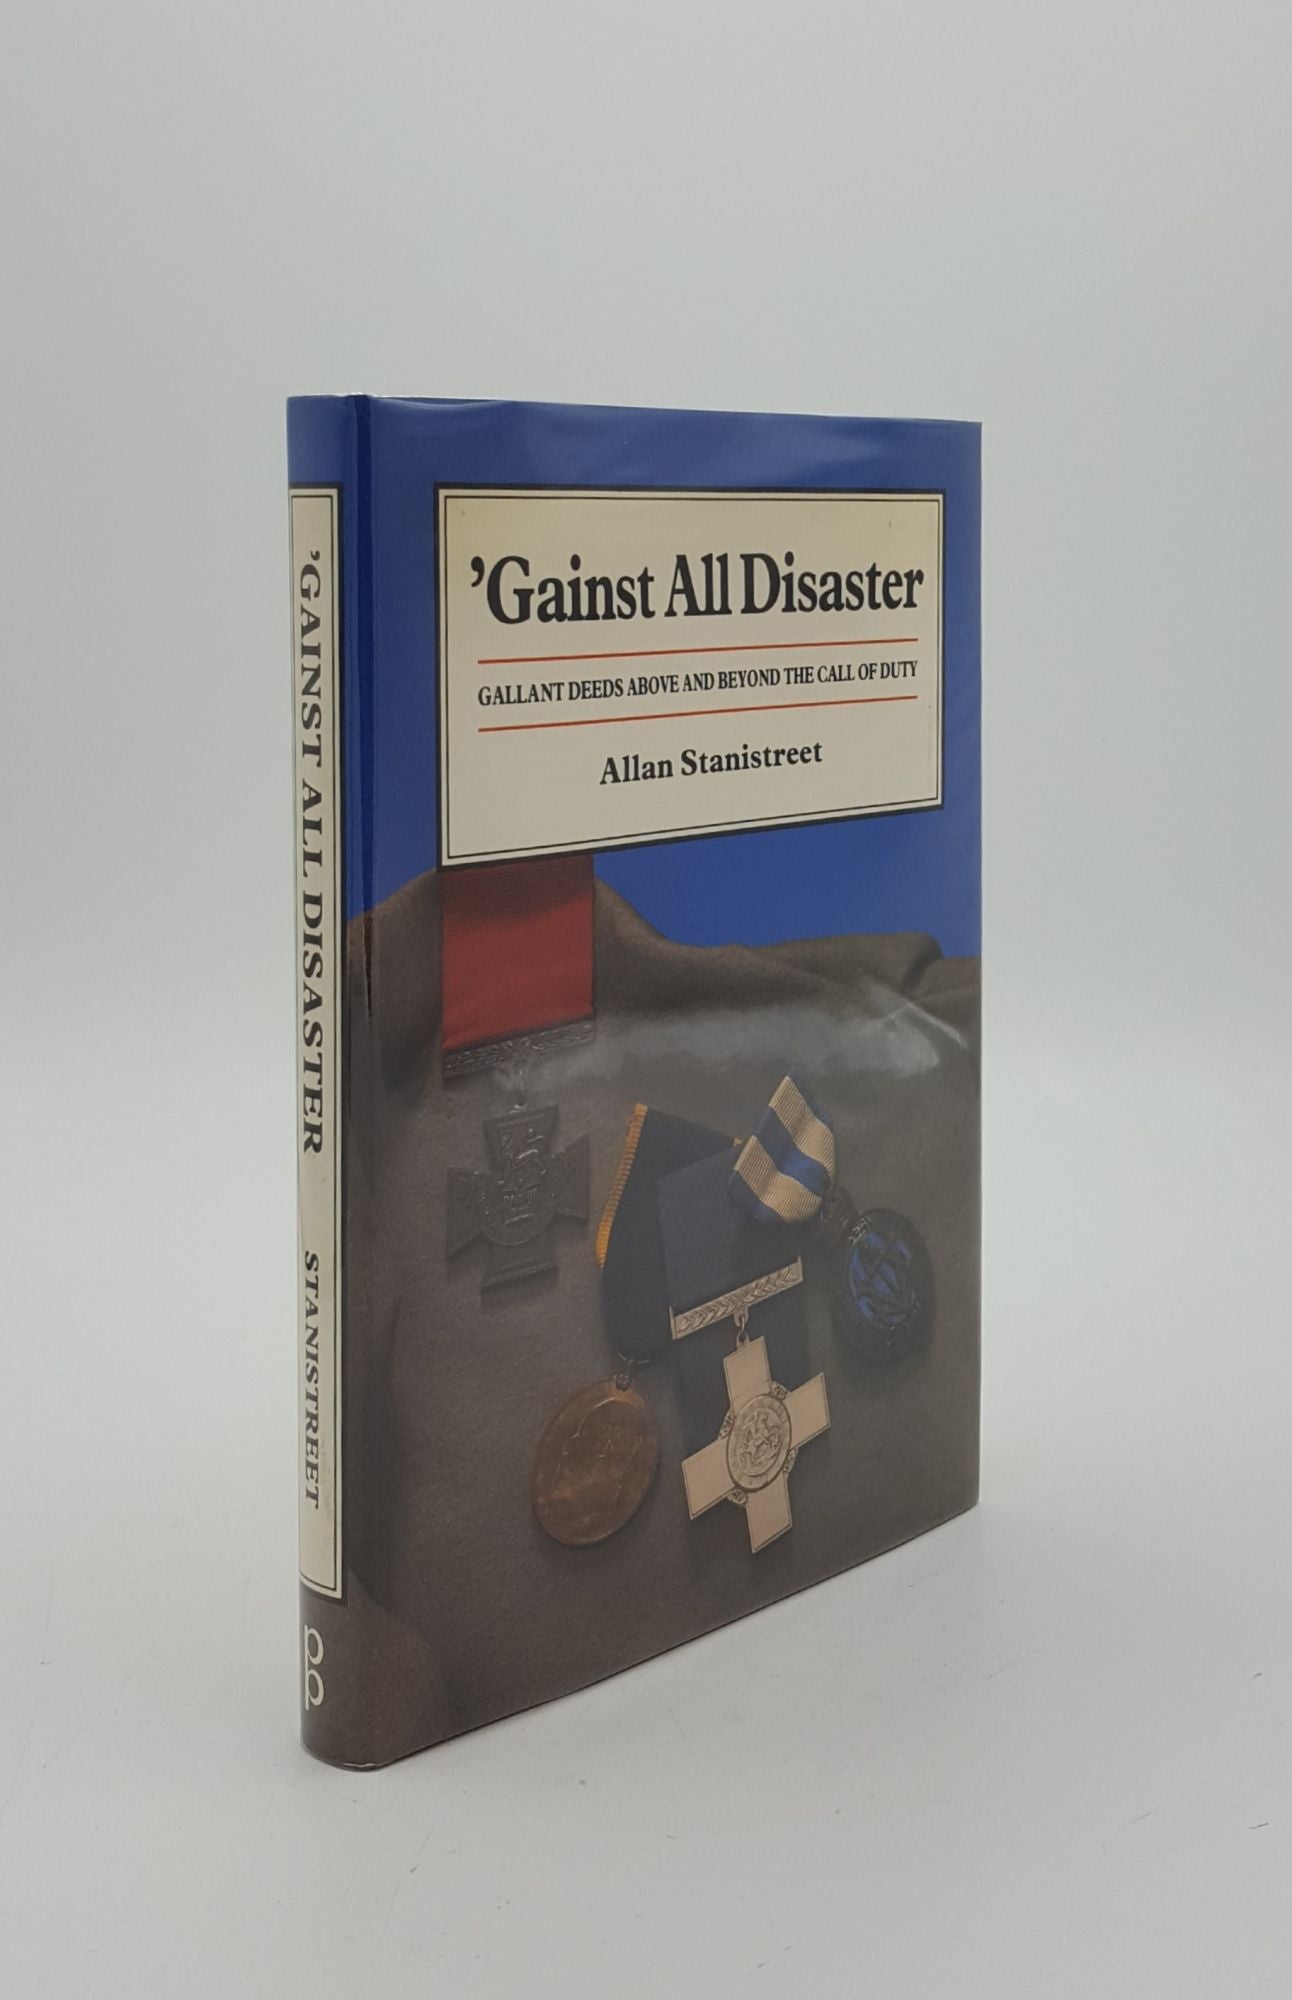 STANISTREET Allan - 'Gainst All Disaster Gallant Deeds Above and Beyond the Call of Duty